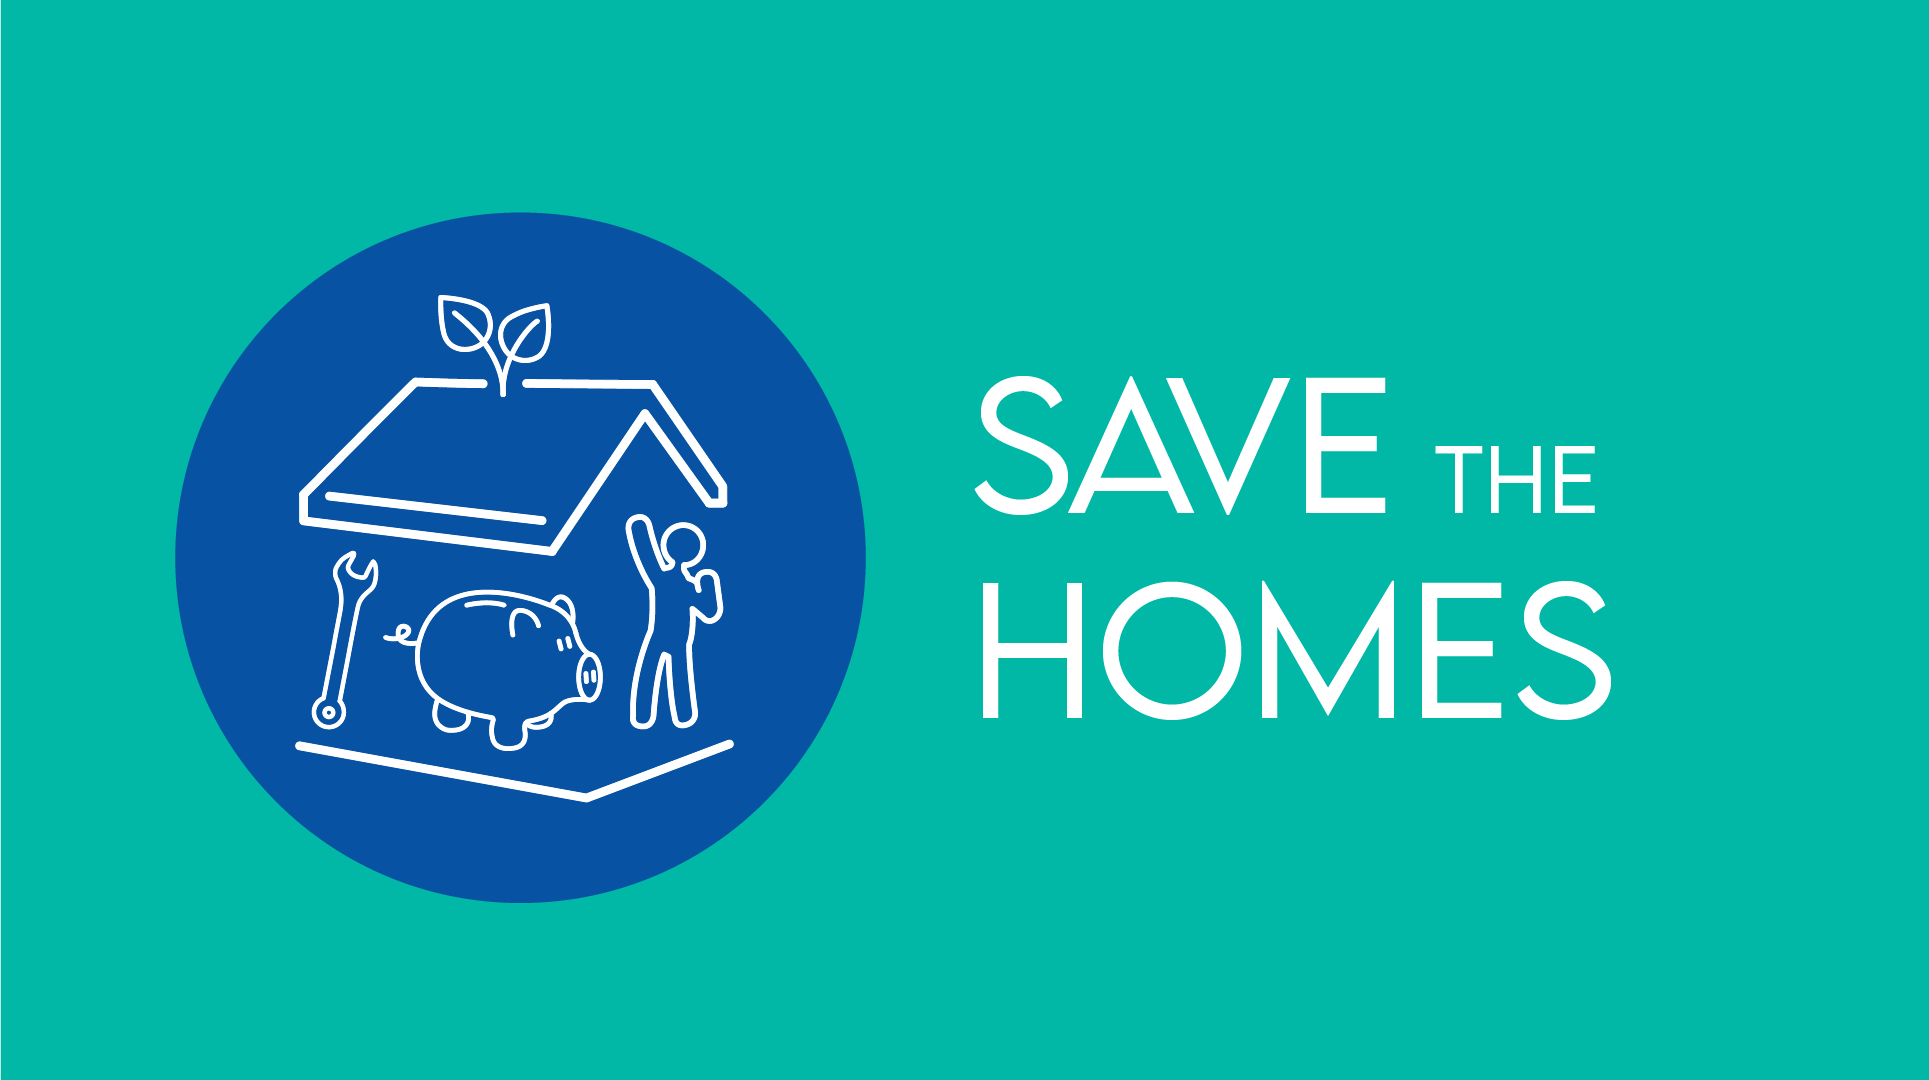 Save the Homes